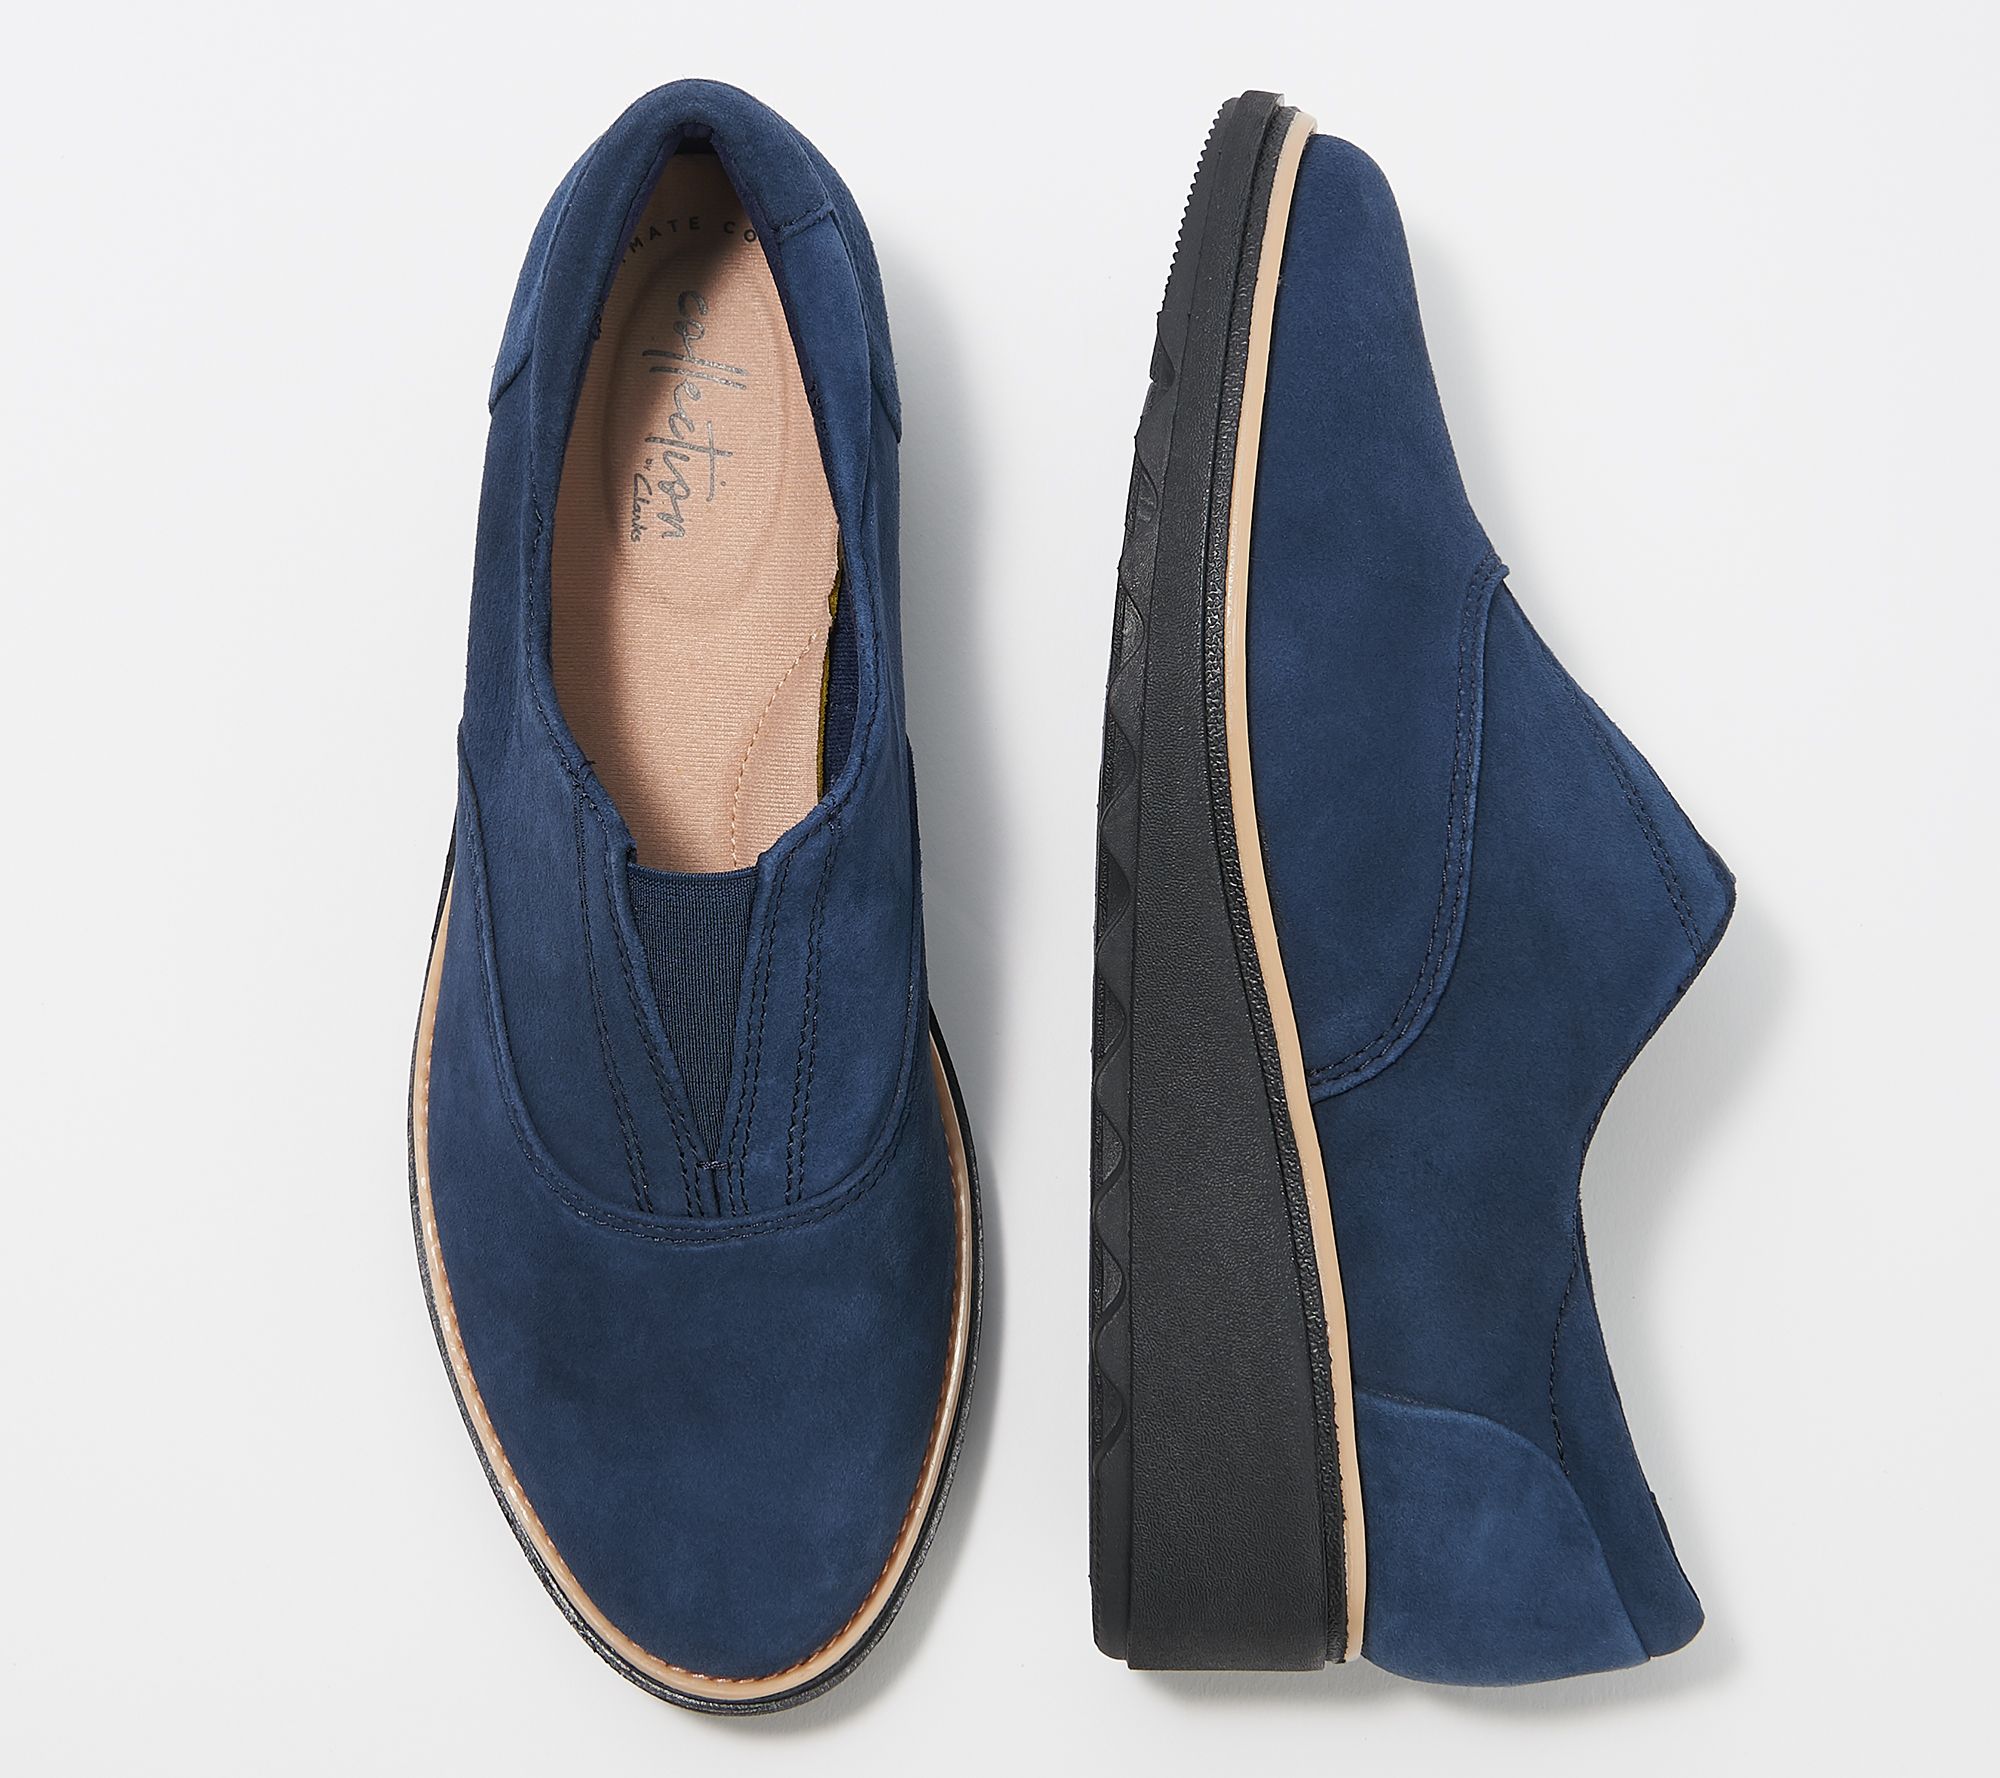 Clarks Collection Suede Slip-On Shoes 